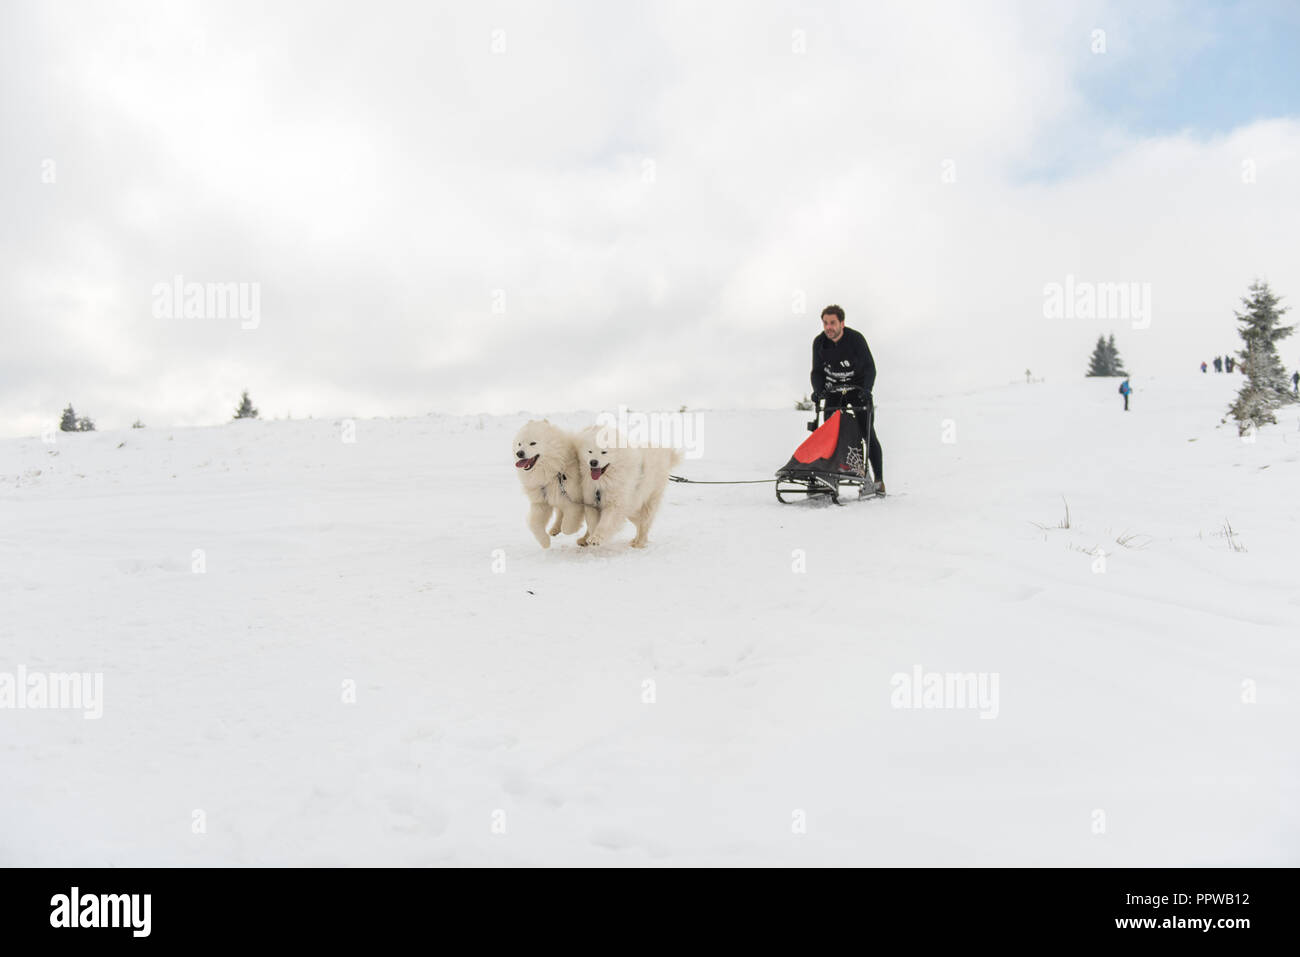 BELIS, ROMANIA - FEBRUARY 17, 2018: Musher racing at a public dog sled race show with samoyed dogs in the Transylvanian mountains Stock Photo